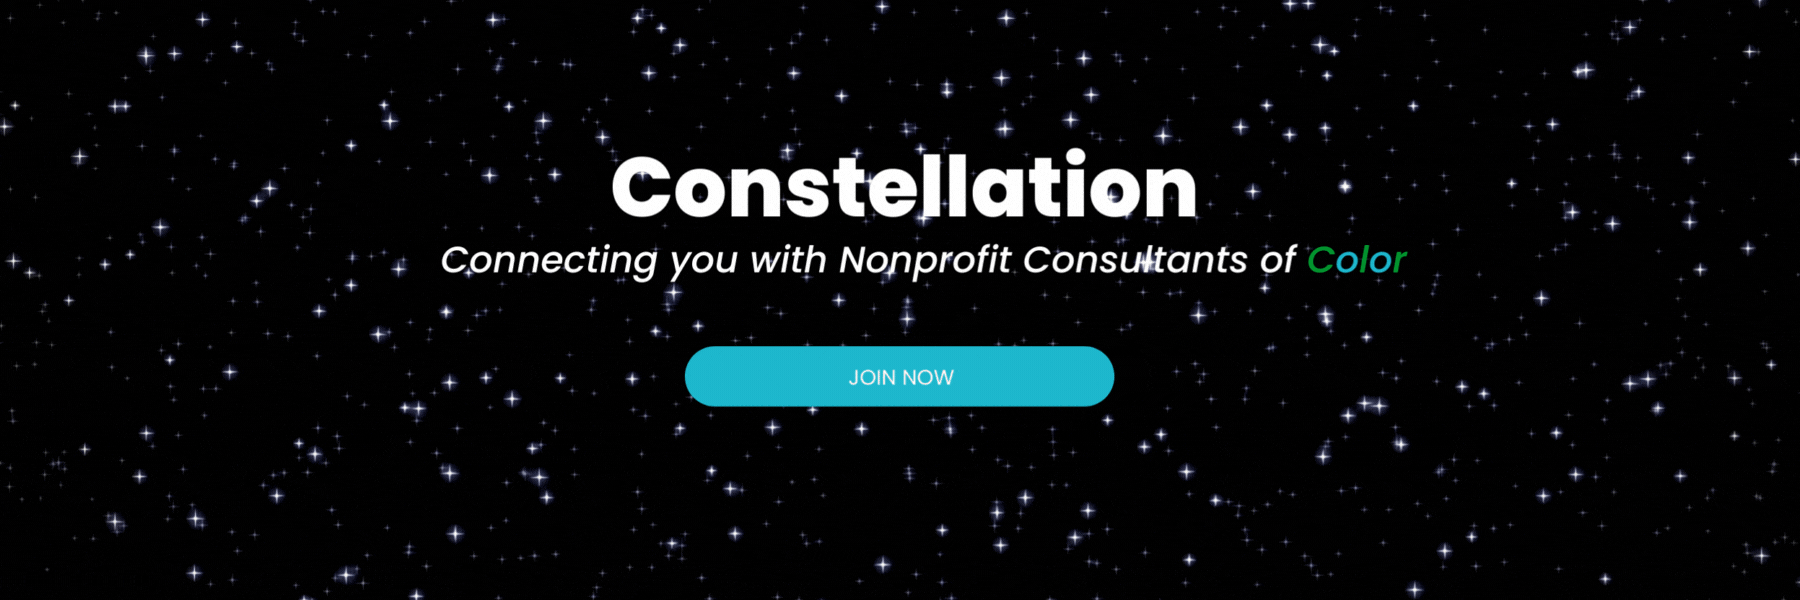 Black sky with tiny white stars glowing and the words Constellation Connecting you with nonprofit consultants of color